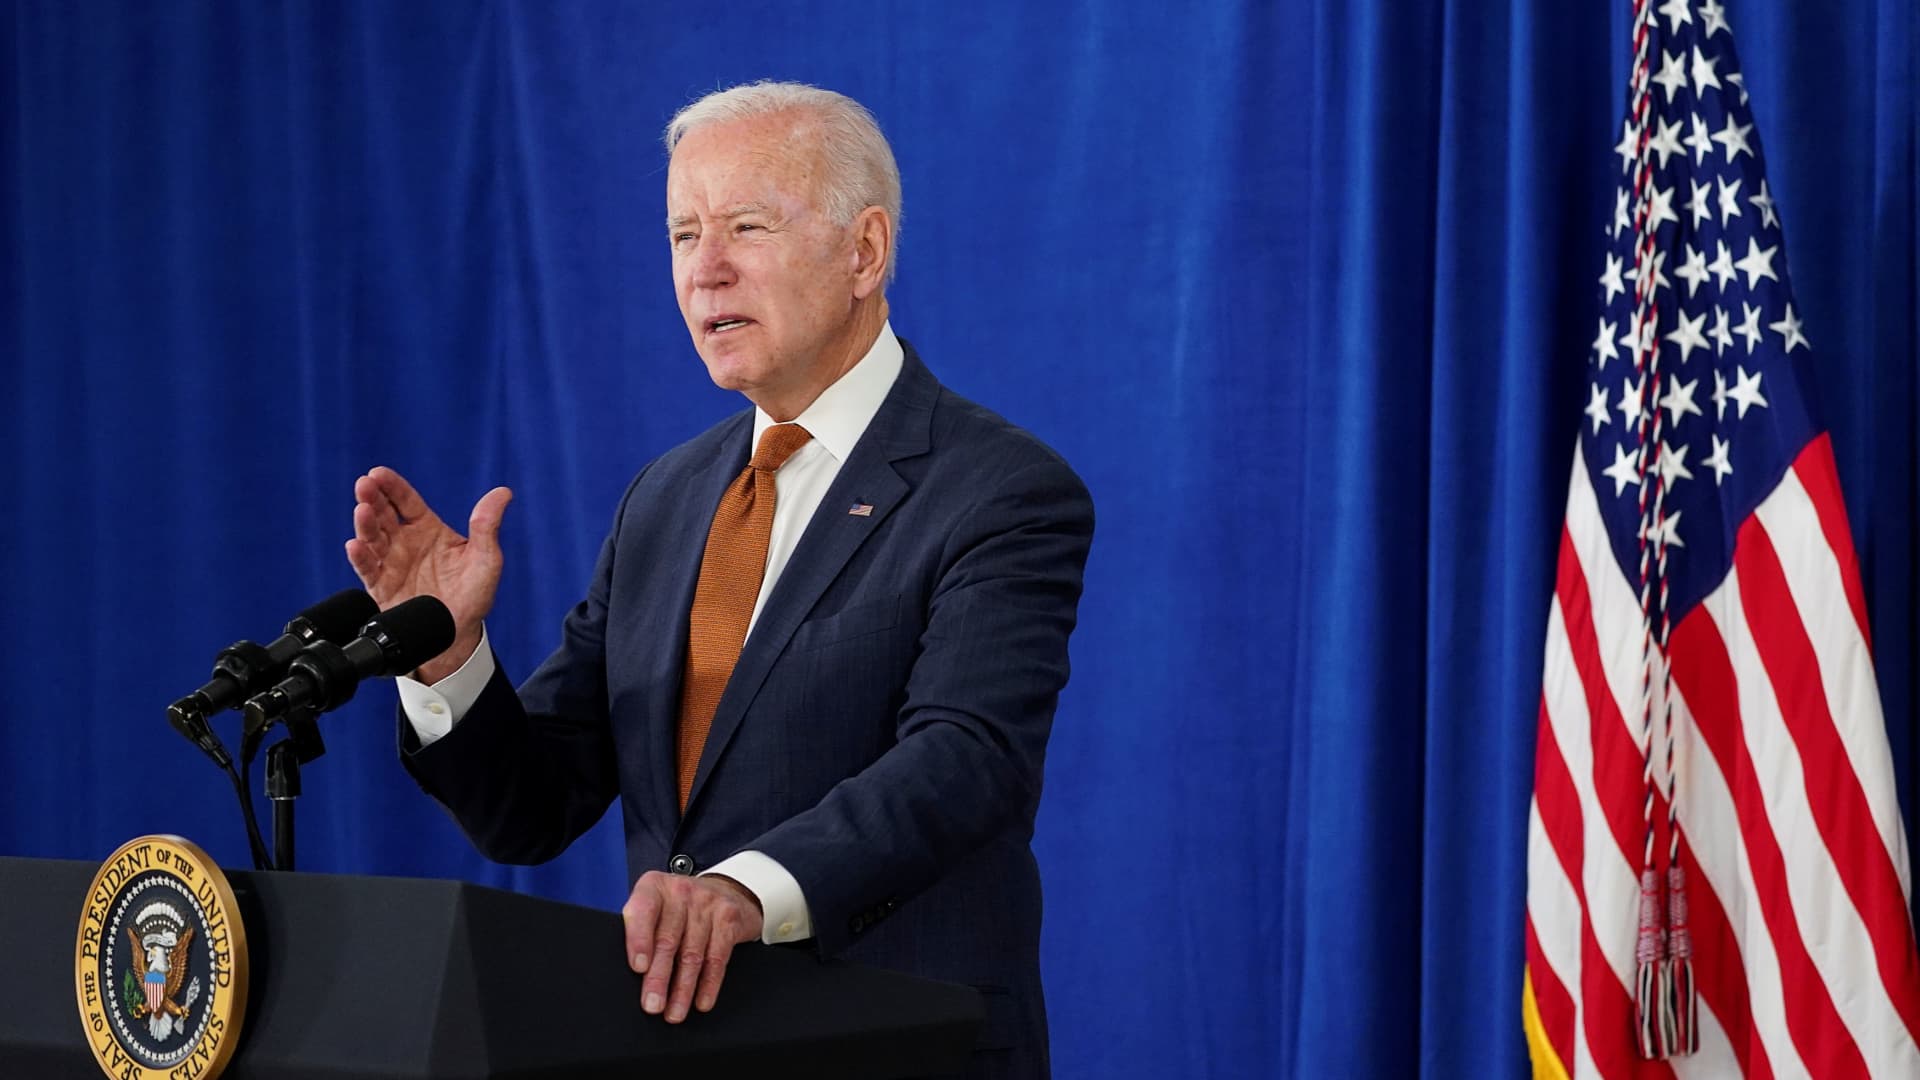 U.S. President Joe Biden delivers remarks on the May jobs report after U.S. employers boosted hiring amid the easing coronavirus disease (COVID-19) pandemic, at the Rehoboth Beach Convention Center in Rehoboth Beach, Delaware, U.S., June 4, 2021.